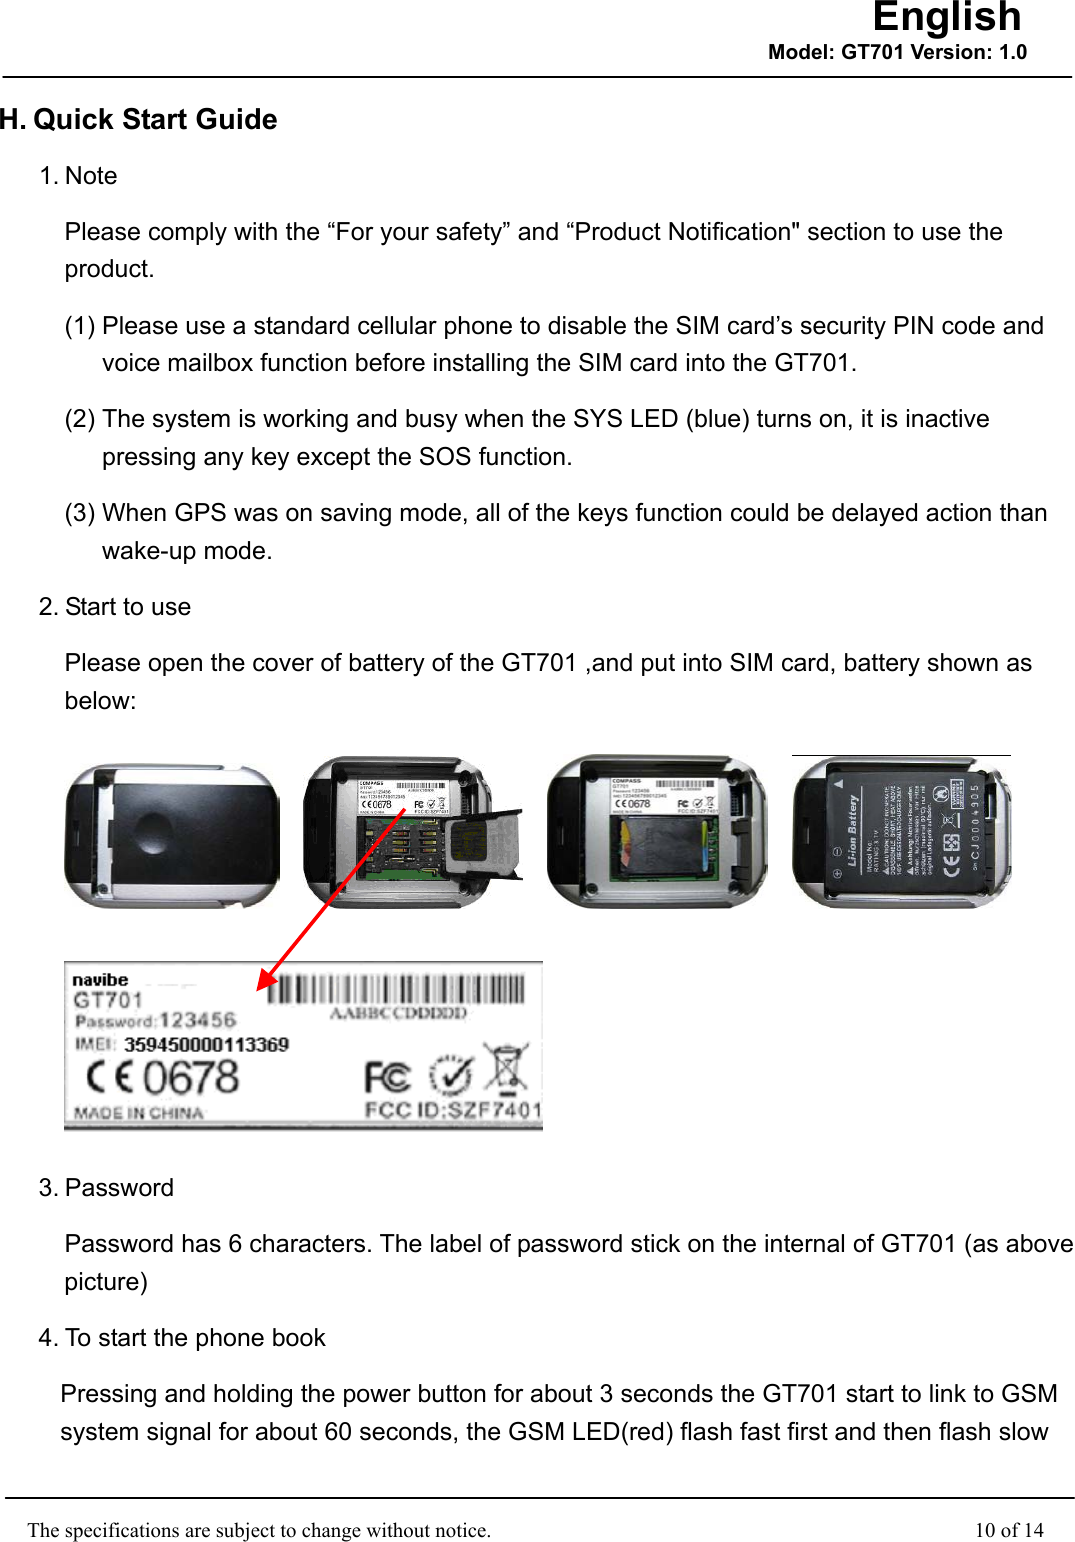                                                    The specifications are subject to change without notice.                                              10 of 14 English Model: GT701 Version: 1.0H. Quick Start Guide   1. Note Please comply with the “For your safety” and “Product Notification&quot; section to use the product.  (1) Please use a standard cellular phone to disable the SIM card’s security PIN code and voice mailbox function before installing the SIM card into the GT701. (2) The system is working and busy when the SYS LED (blue) turns on, it is inactive pressing any key except the SOS function. (3) When GPS was on saving mode, all of the keys function could be delayed action than wake-up mode. 2. Start to use Please open the cover of battery of the GT701 ,and put into SIM card, battery shown as below:             3. Password Password has 6 characters. The label of password stick on the internal of GT701 (as above picture) 4. To start the phone book Pressing and holding the power button for about 3 seconds the GT701 start to link to GSM system signal for about 60 seconds, the GSM LED(red) flash fast first and then flash slow 